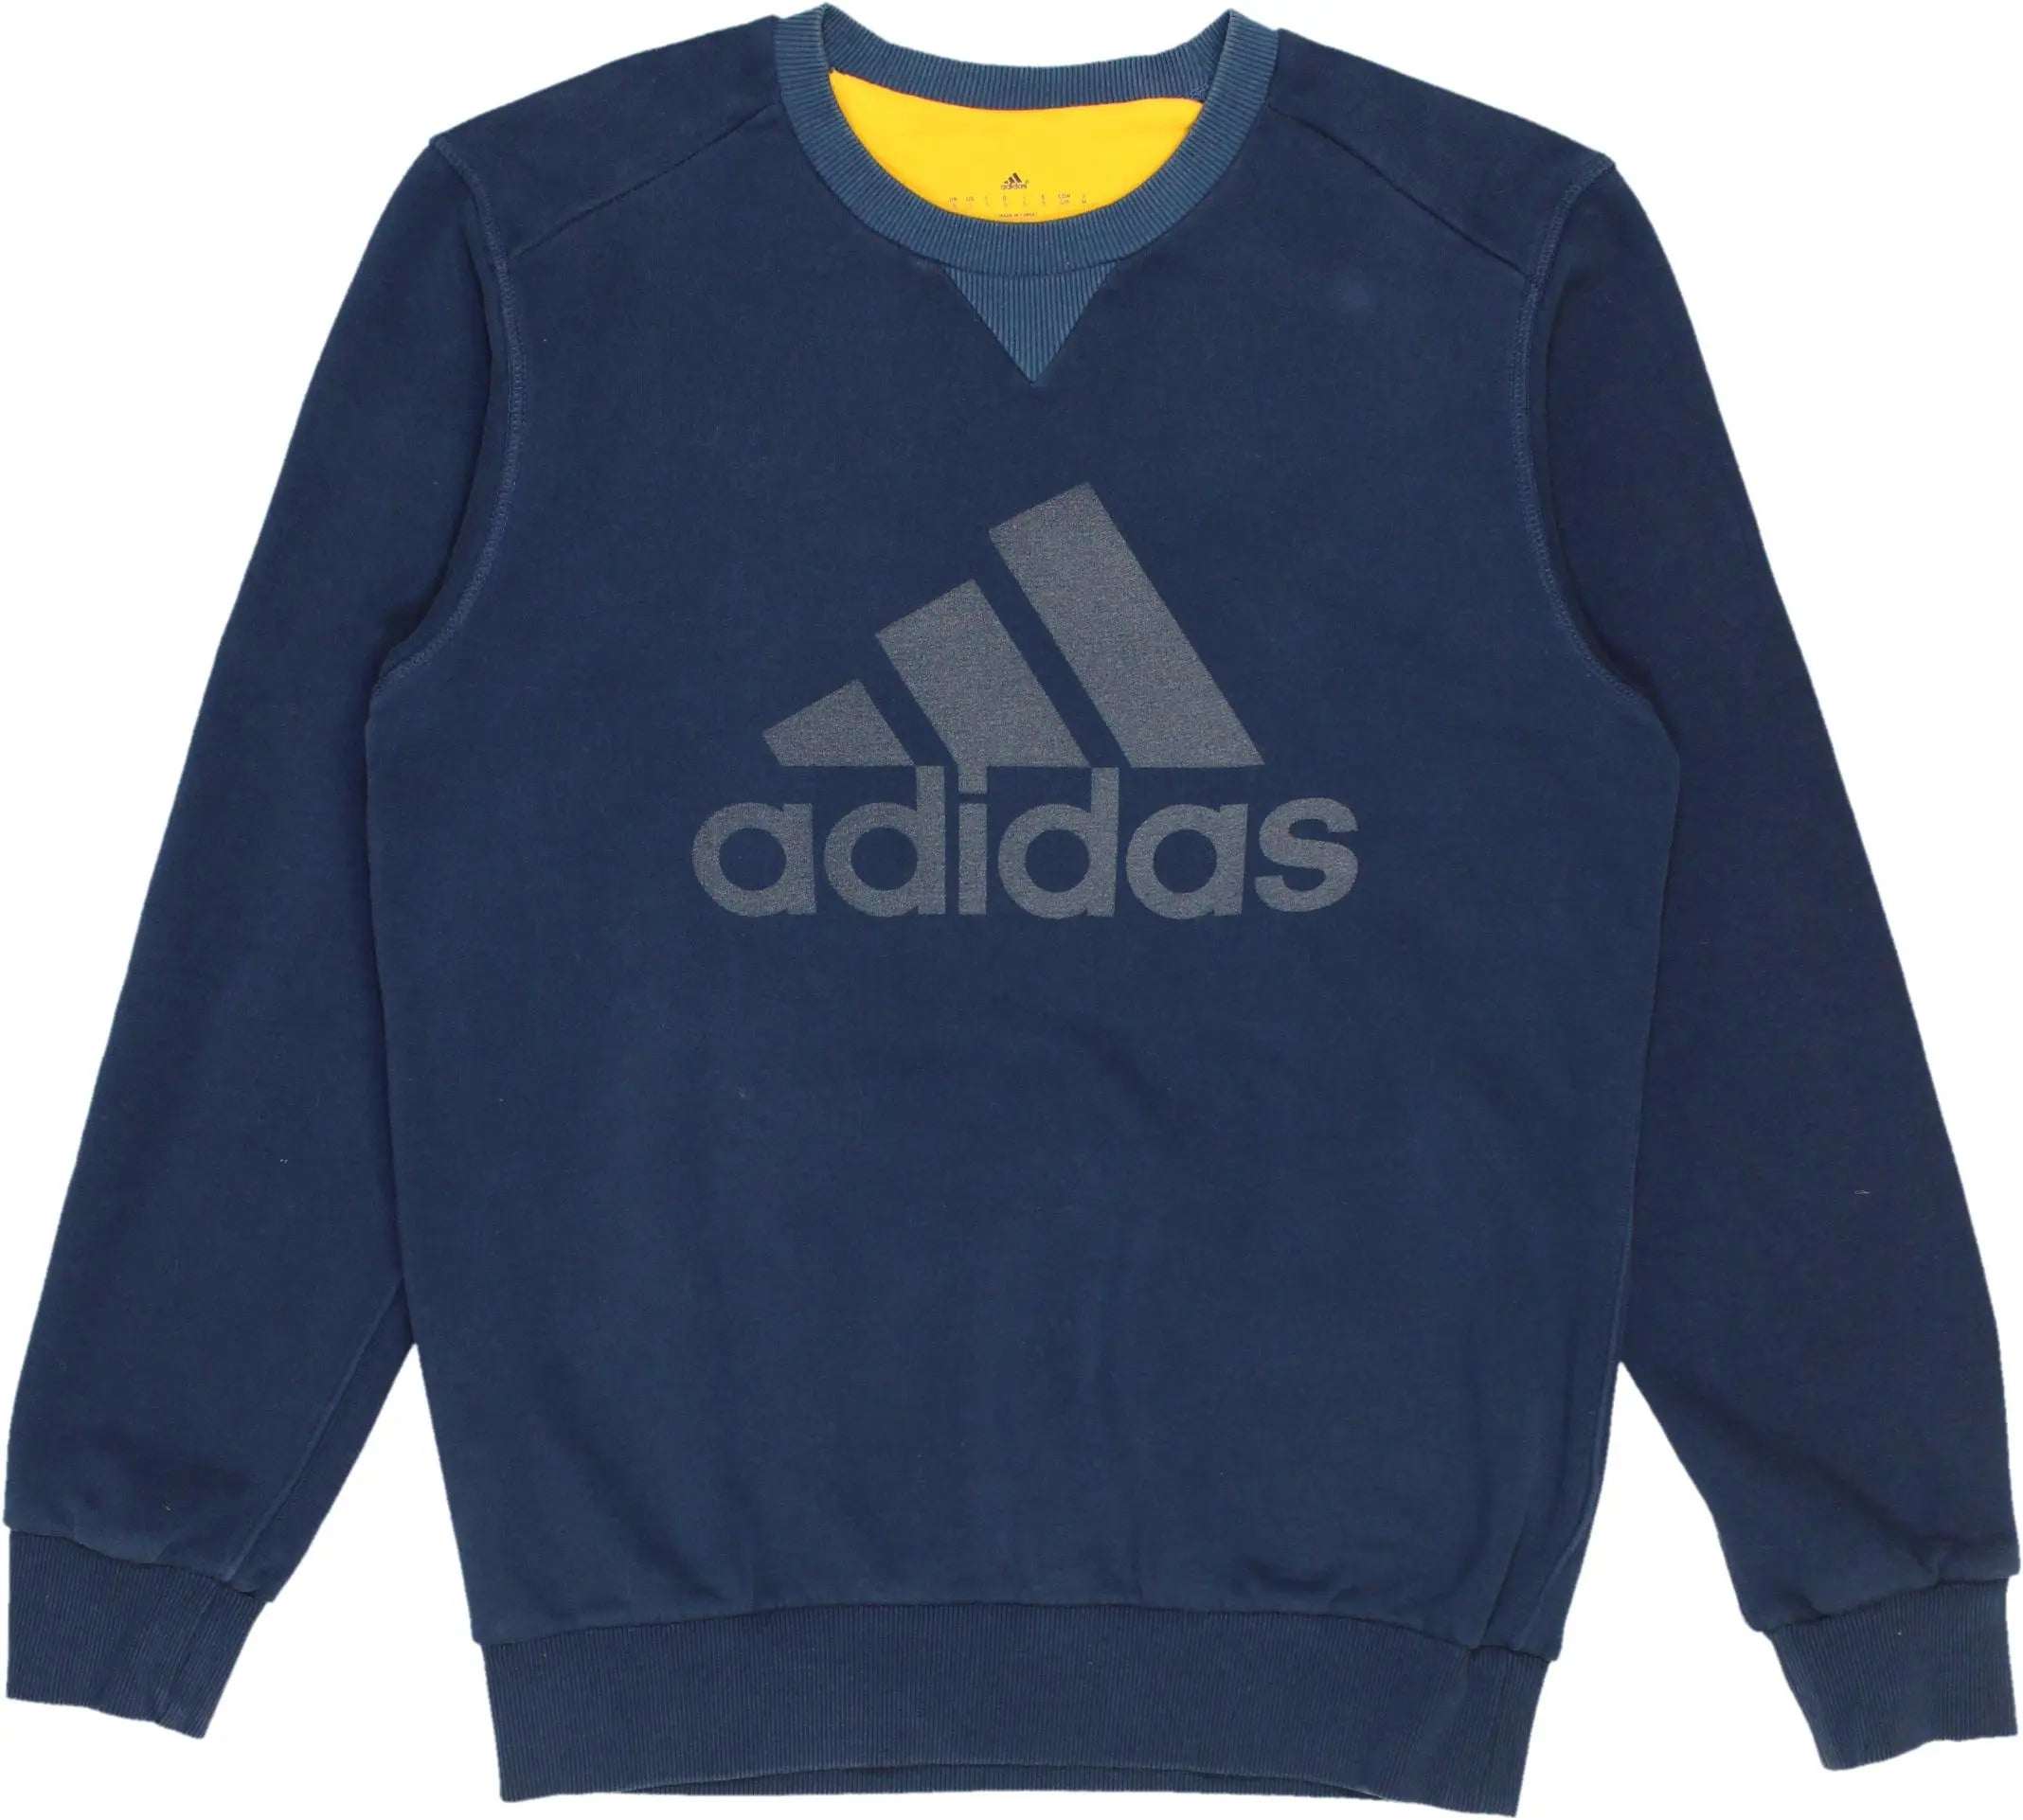 Adidas - Adidas Sweater- ThriftTale.com - Vintage and second handclothing